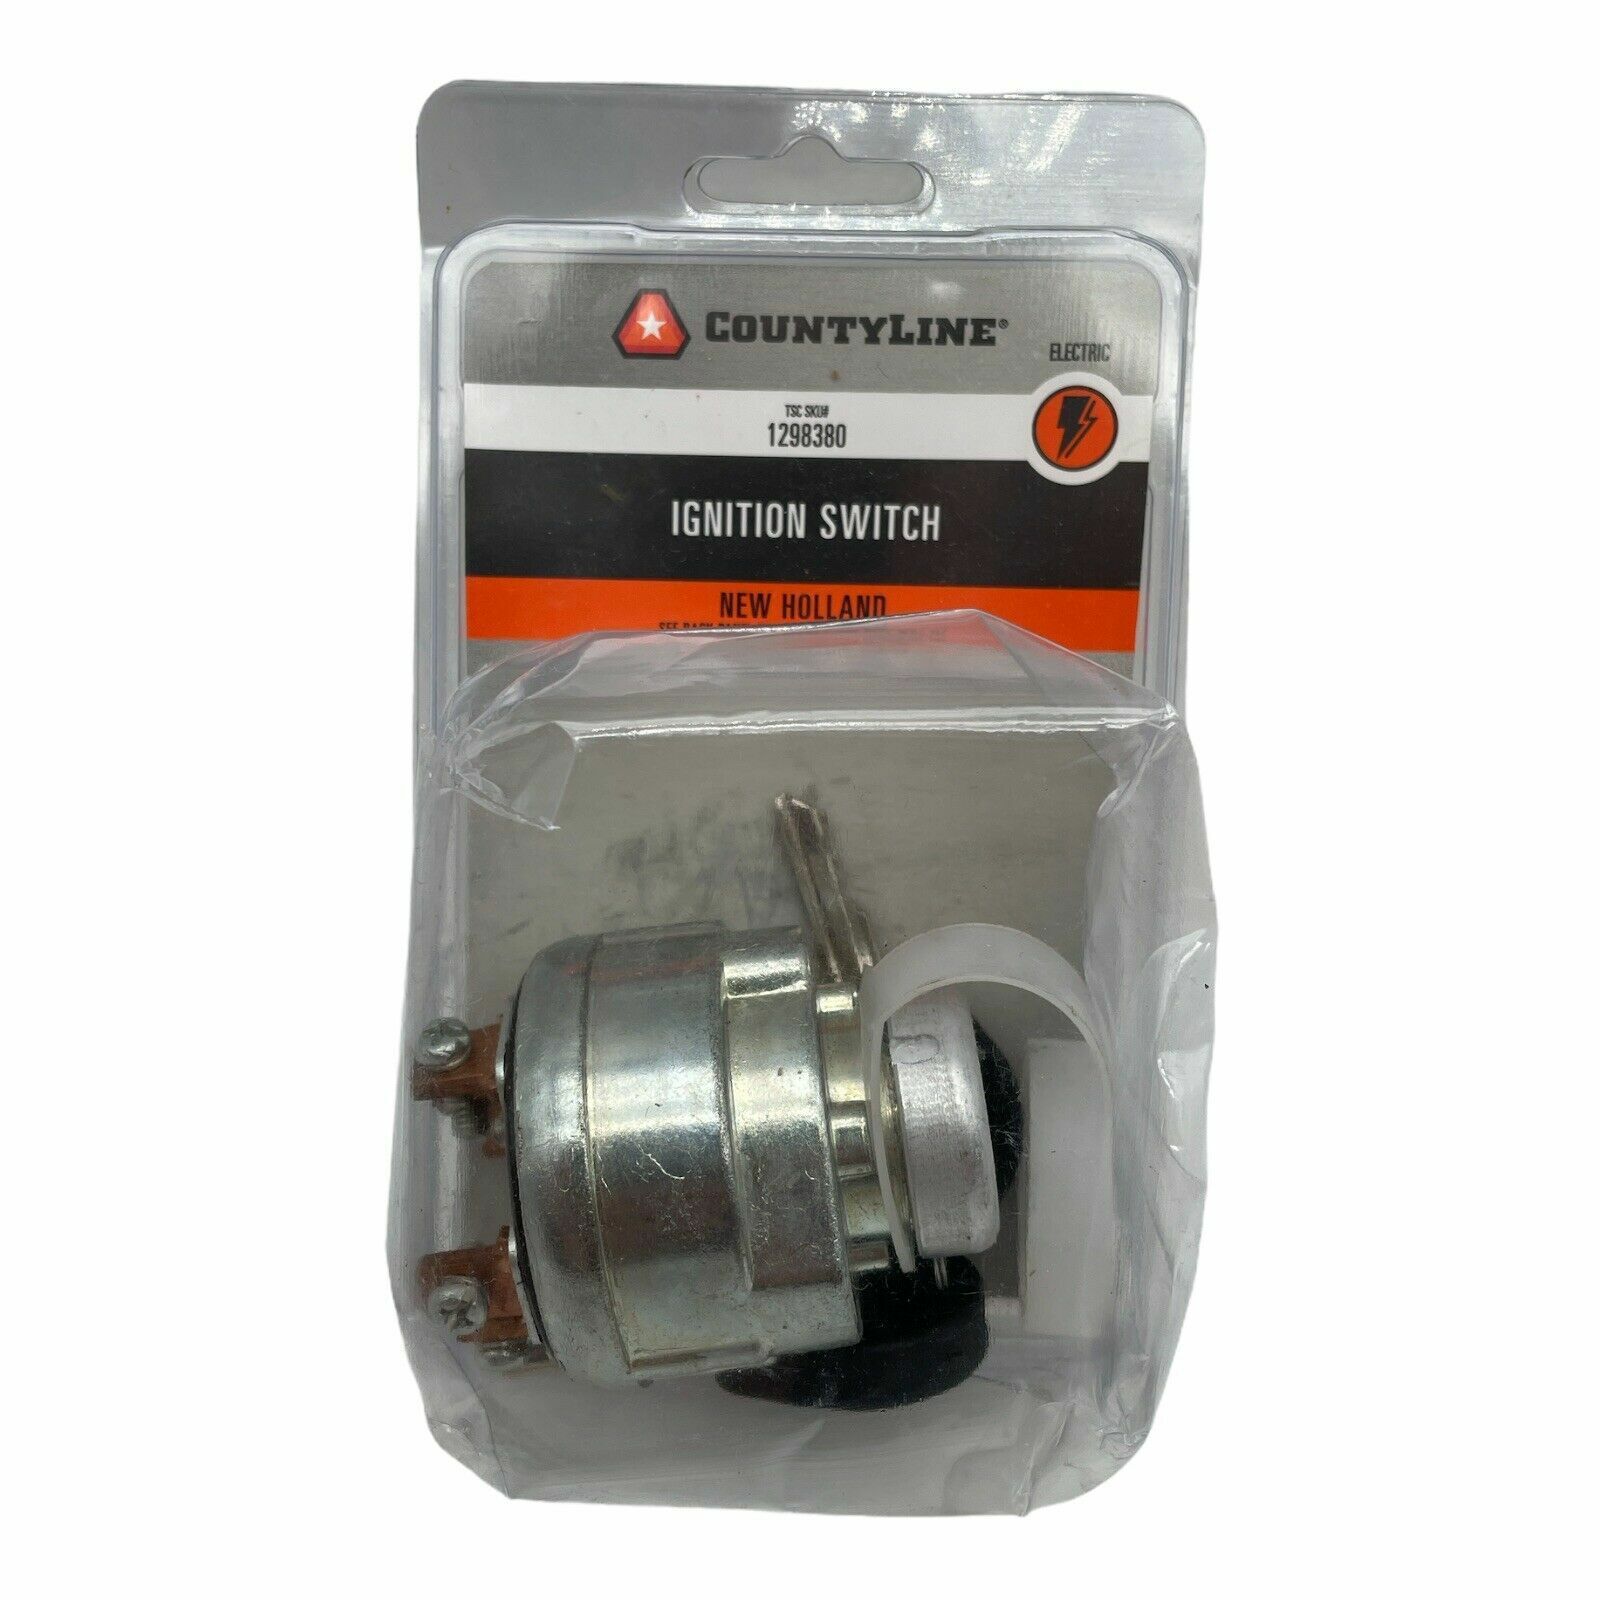 CountyLine Electric Ignition Switch Tractor Popular brand 5 ☆ very popular Holland New 1298380